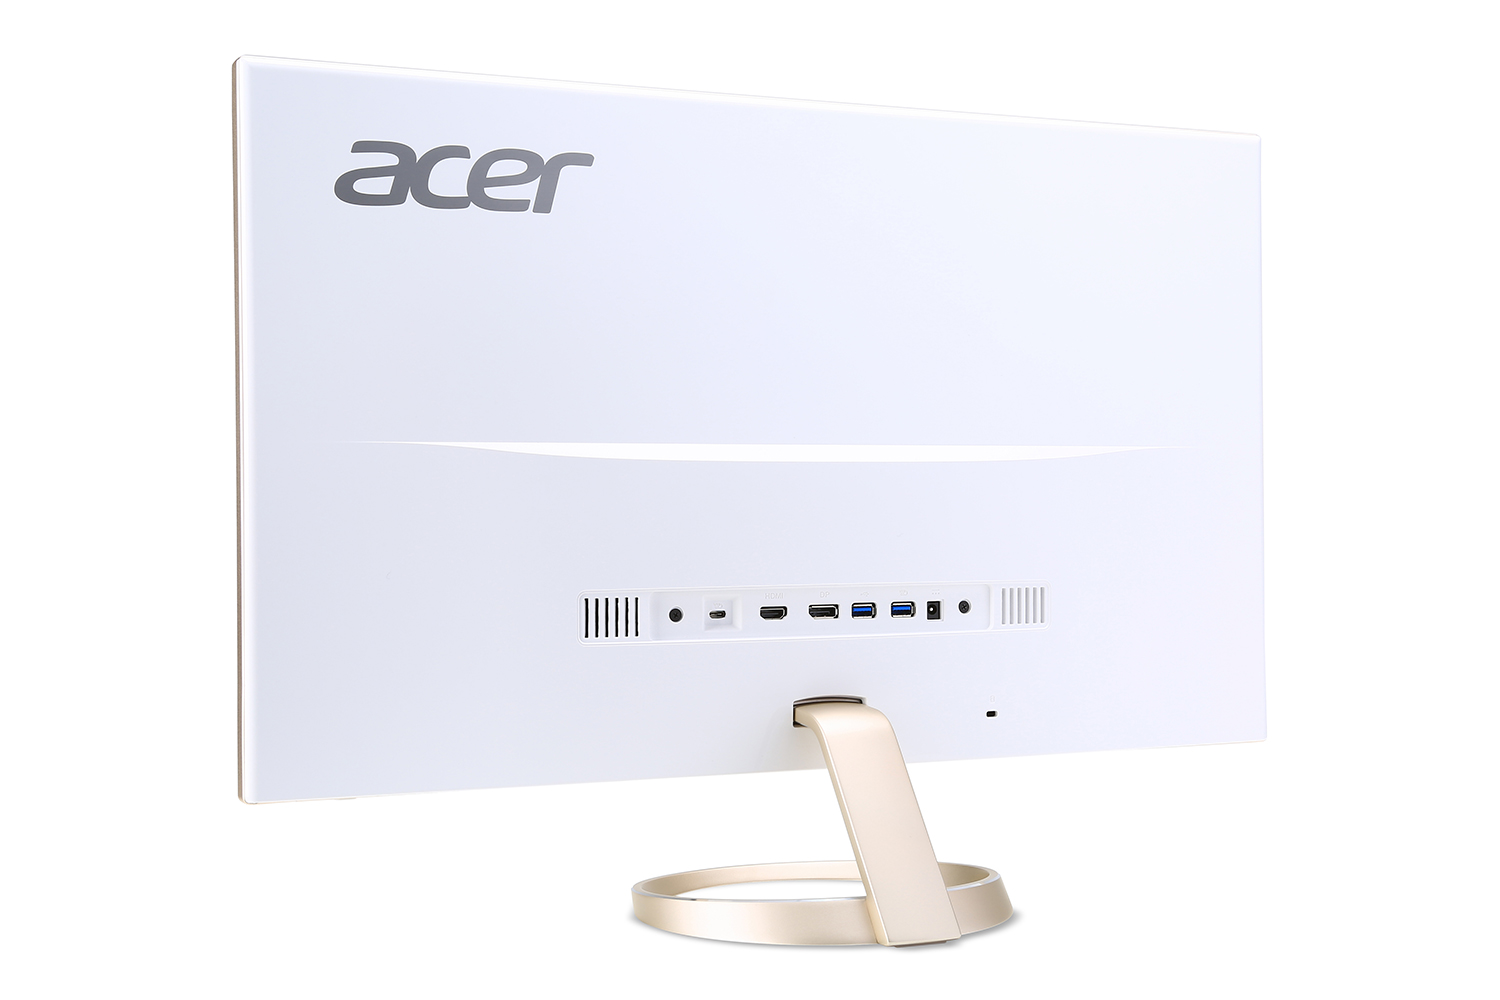 acer computing announce ces 2016 h277hu back view